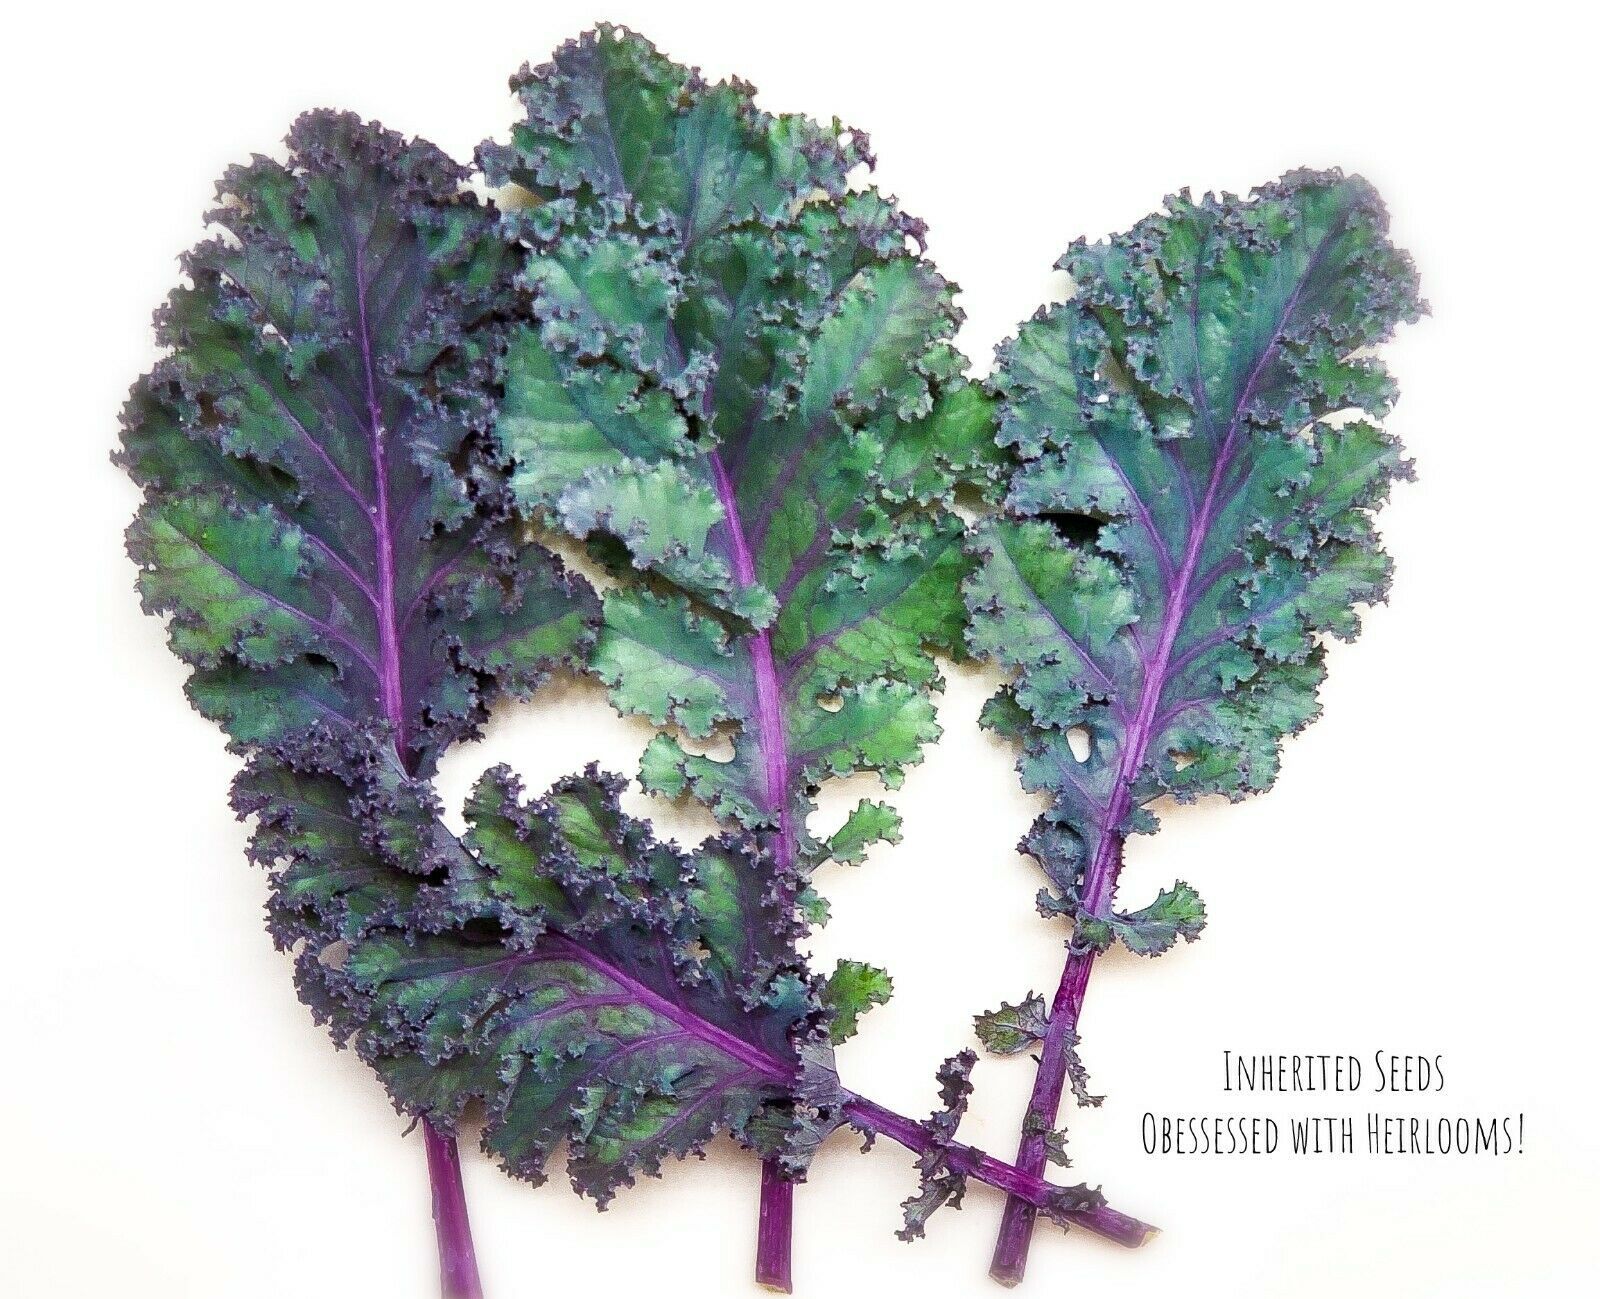 Kale Red Russian HEIRLOOM 100+ Seeds Premium 100% Organic Non GMO Grown In USA